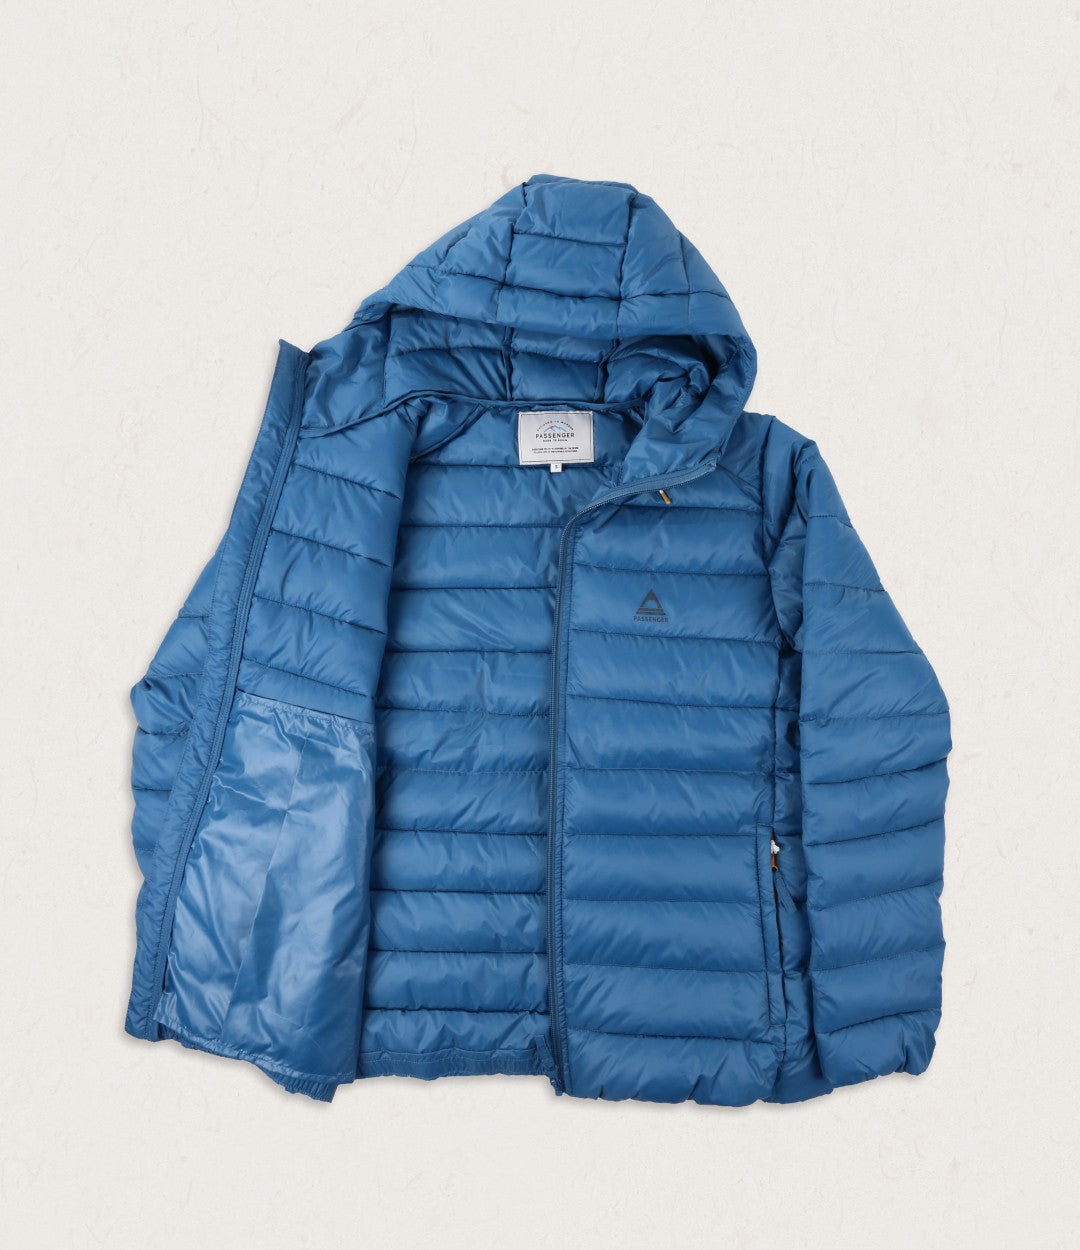 Pow Recycled Insulated Jacket - Blue Steel